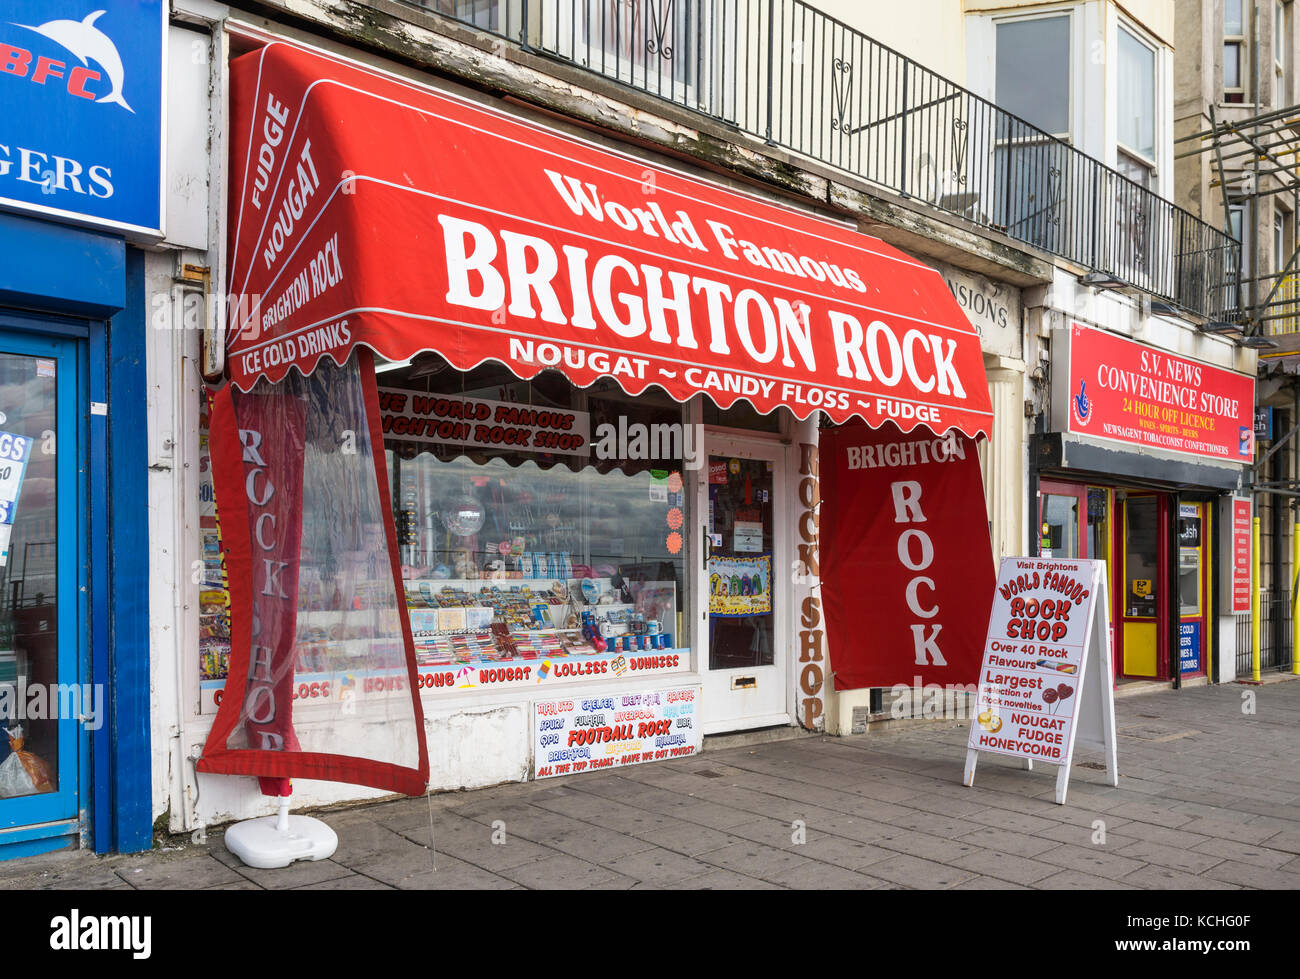 World famous Brighton Rock shop front entrance in Brighton, East Sussex, England, UK. Stock Photo